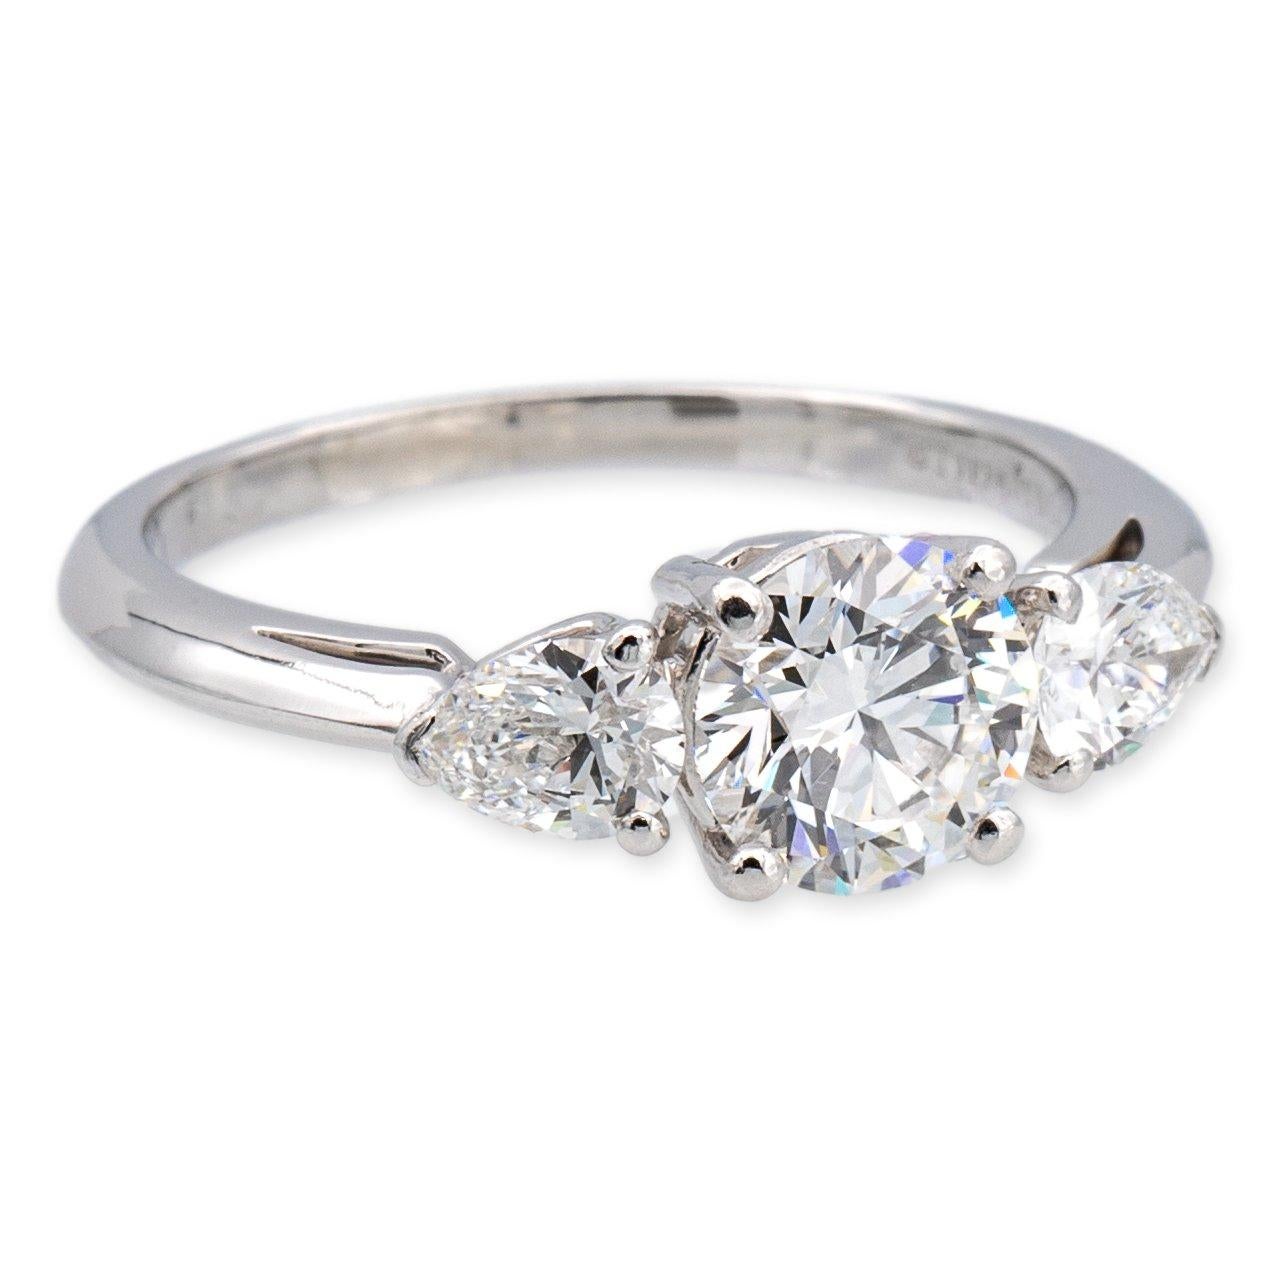 tiffany three stone engagement ring with pear-shaped side stones in platinum